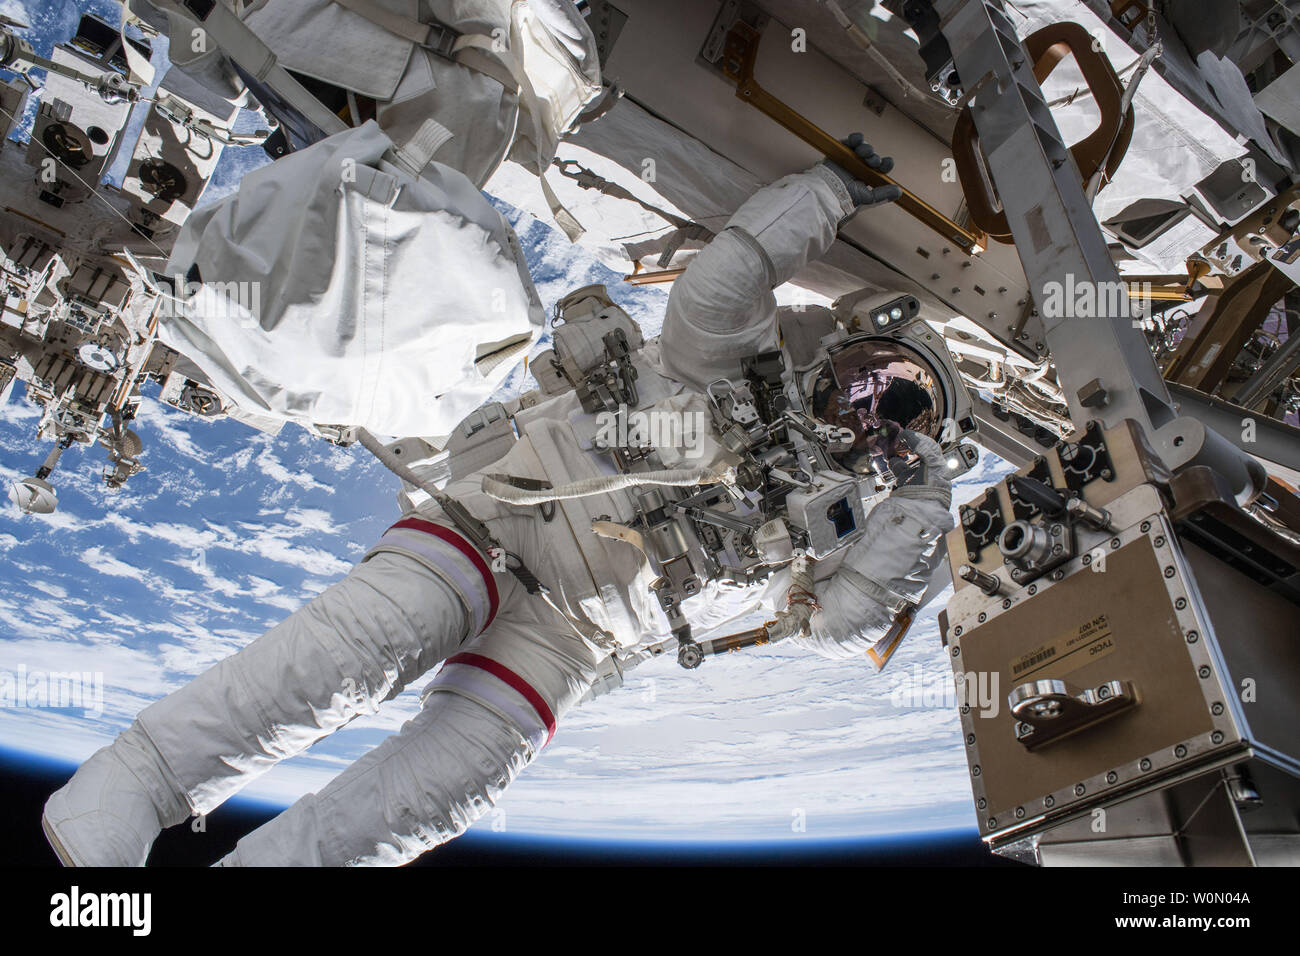 NASA astronaut Drew Feustel seemingly hangs off the International Space Station while conducting a spacewalk with fellow NASA astronaut Ricky Arnold (out of frame) on March 29, 2018. Feustel, as are all spacewalkers, was safely tethered at all times to the space station during the six-hour, ten-minute spacewalk. This was the seventh spacewalk of Feustel's career, while Arnold was on his third spacewalk. The two veteran astronauts successfully installed wireless communications antennas on the station's Tranquility module, replaced a camera system on the port truss and removed suspect hoses from Stock Photo